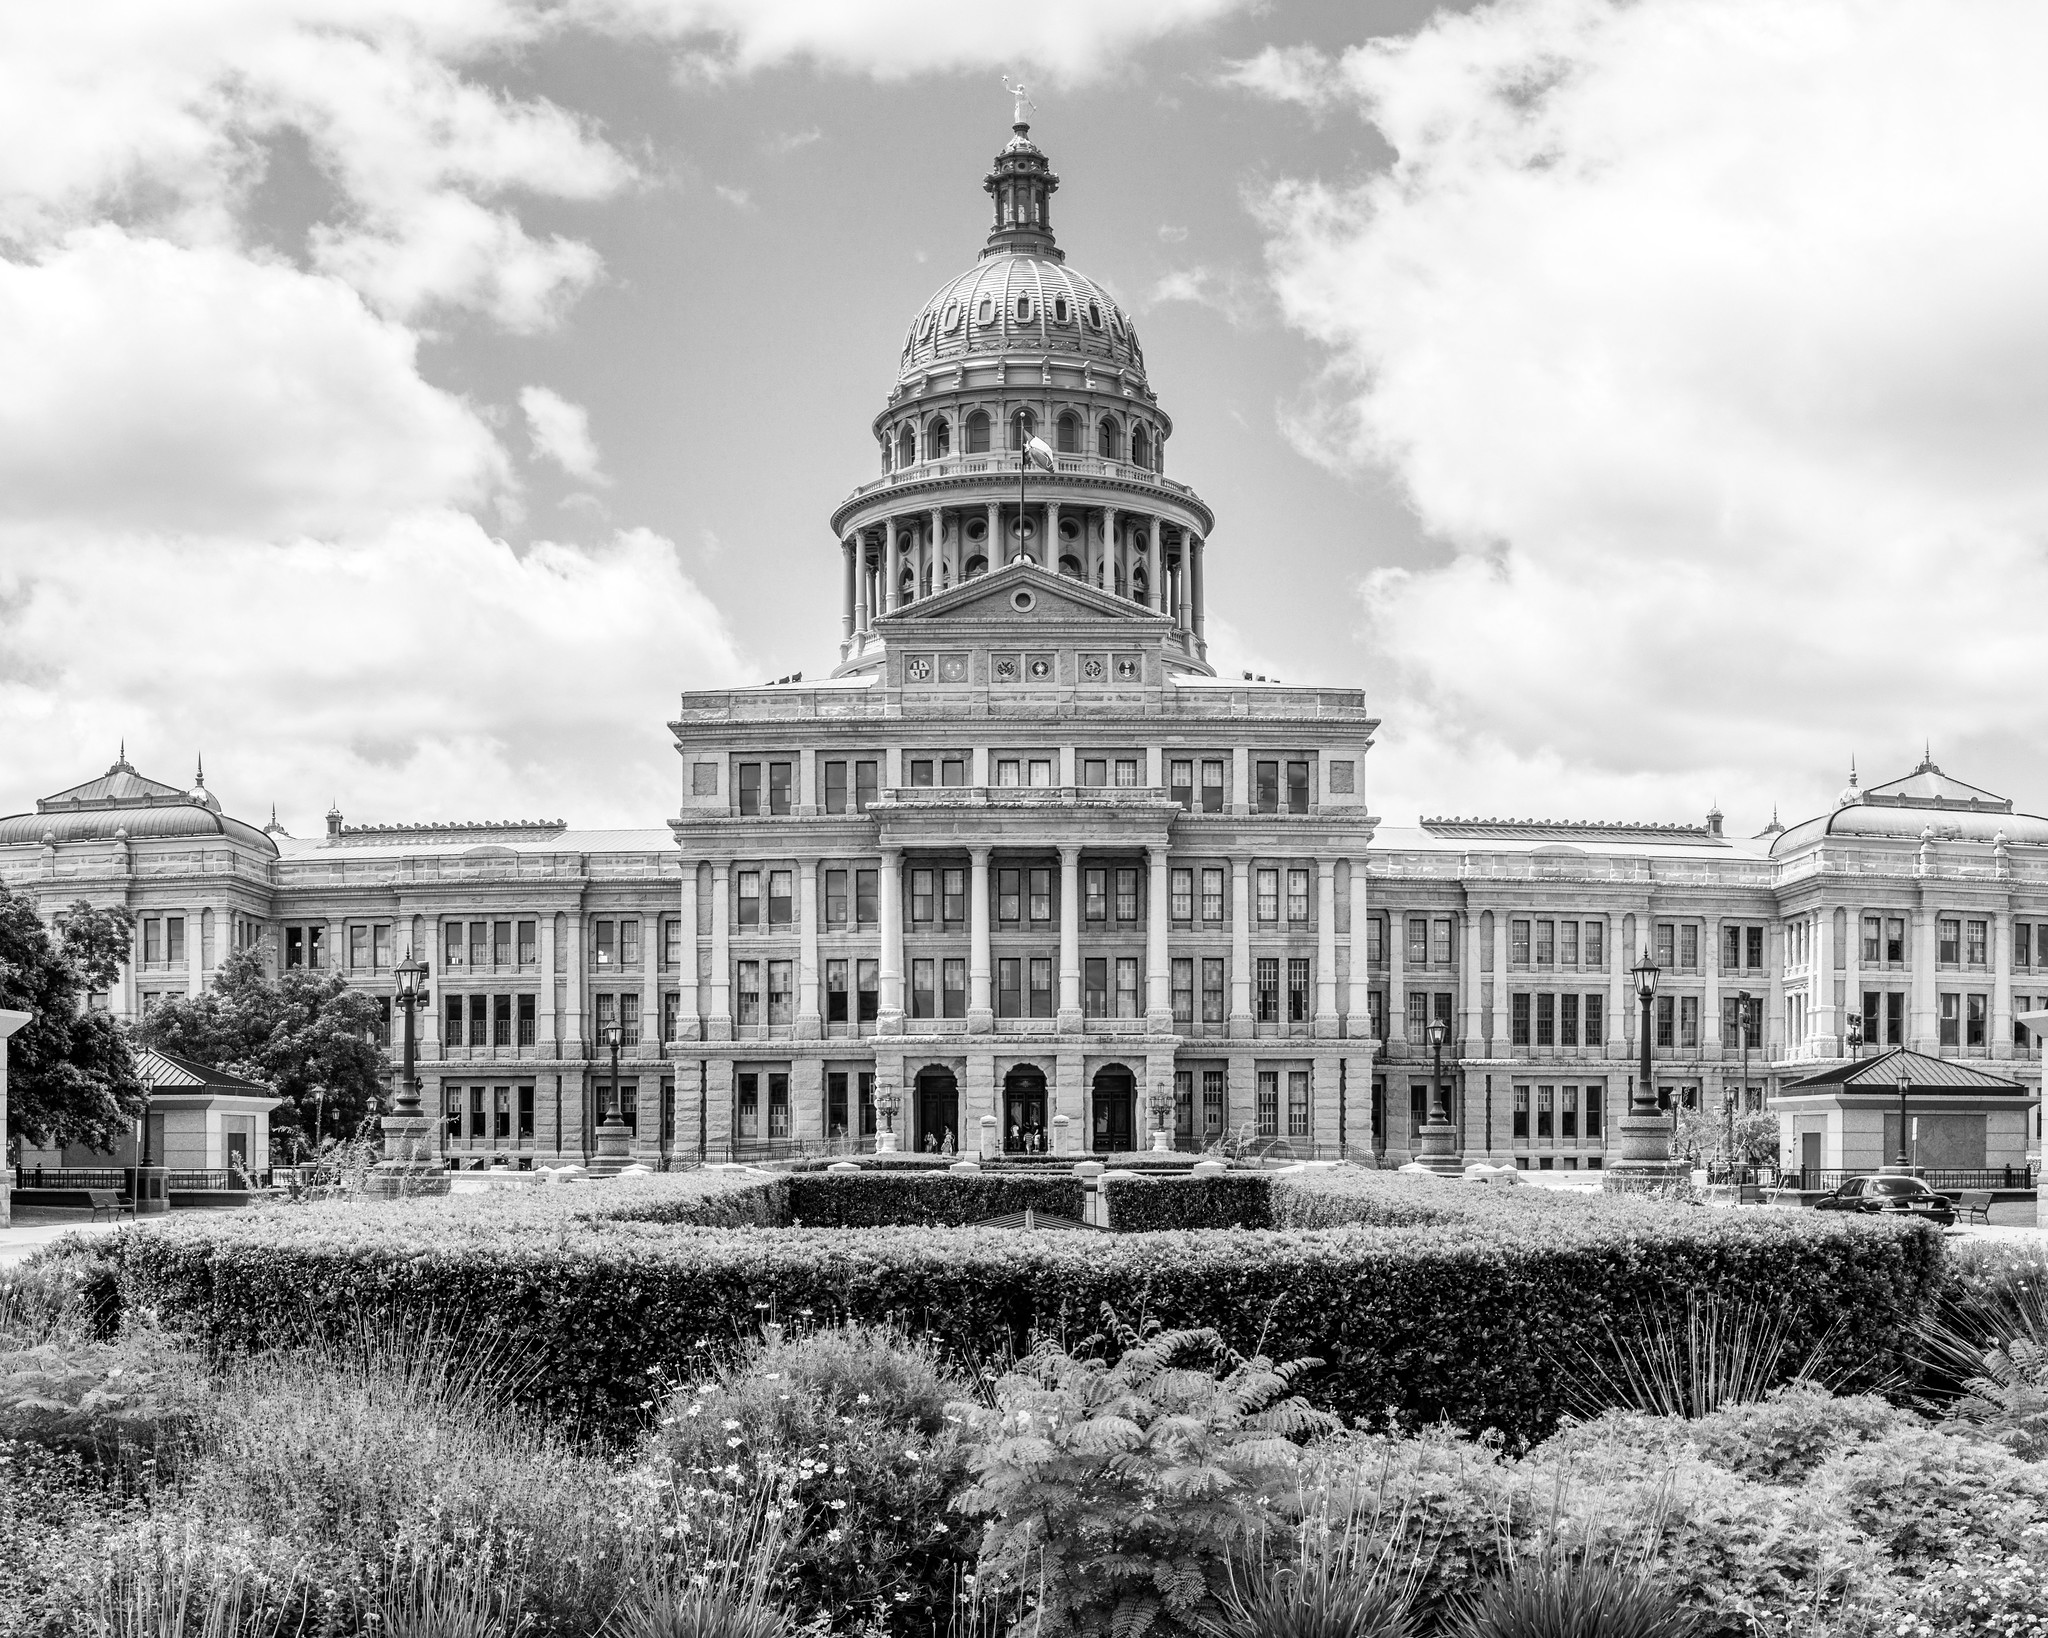 Photo of the Texas State Capitol in black and white